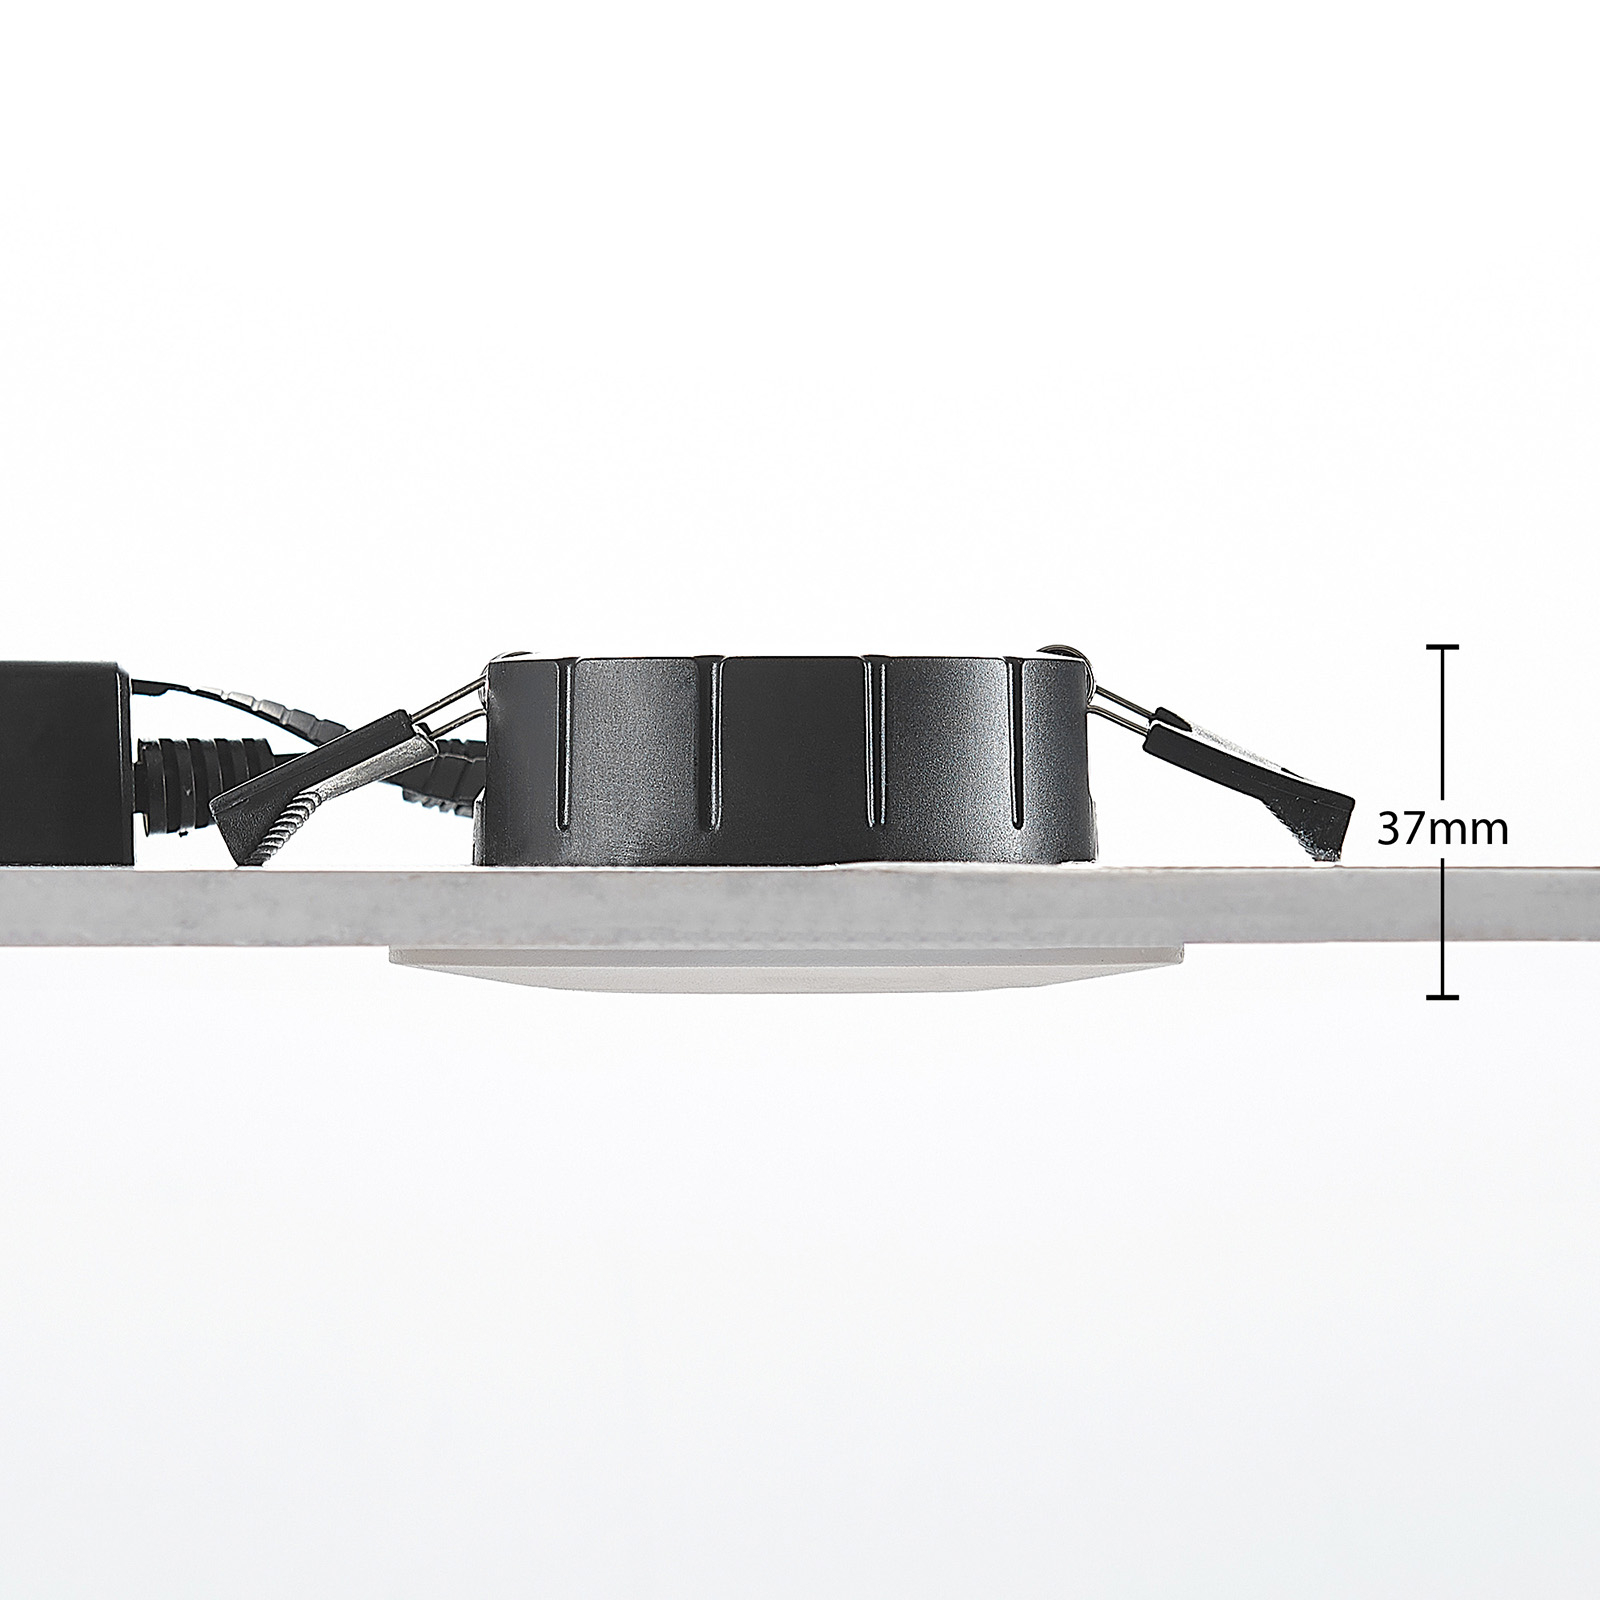 Arcchio Ricals downlight LED, atenuable